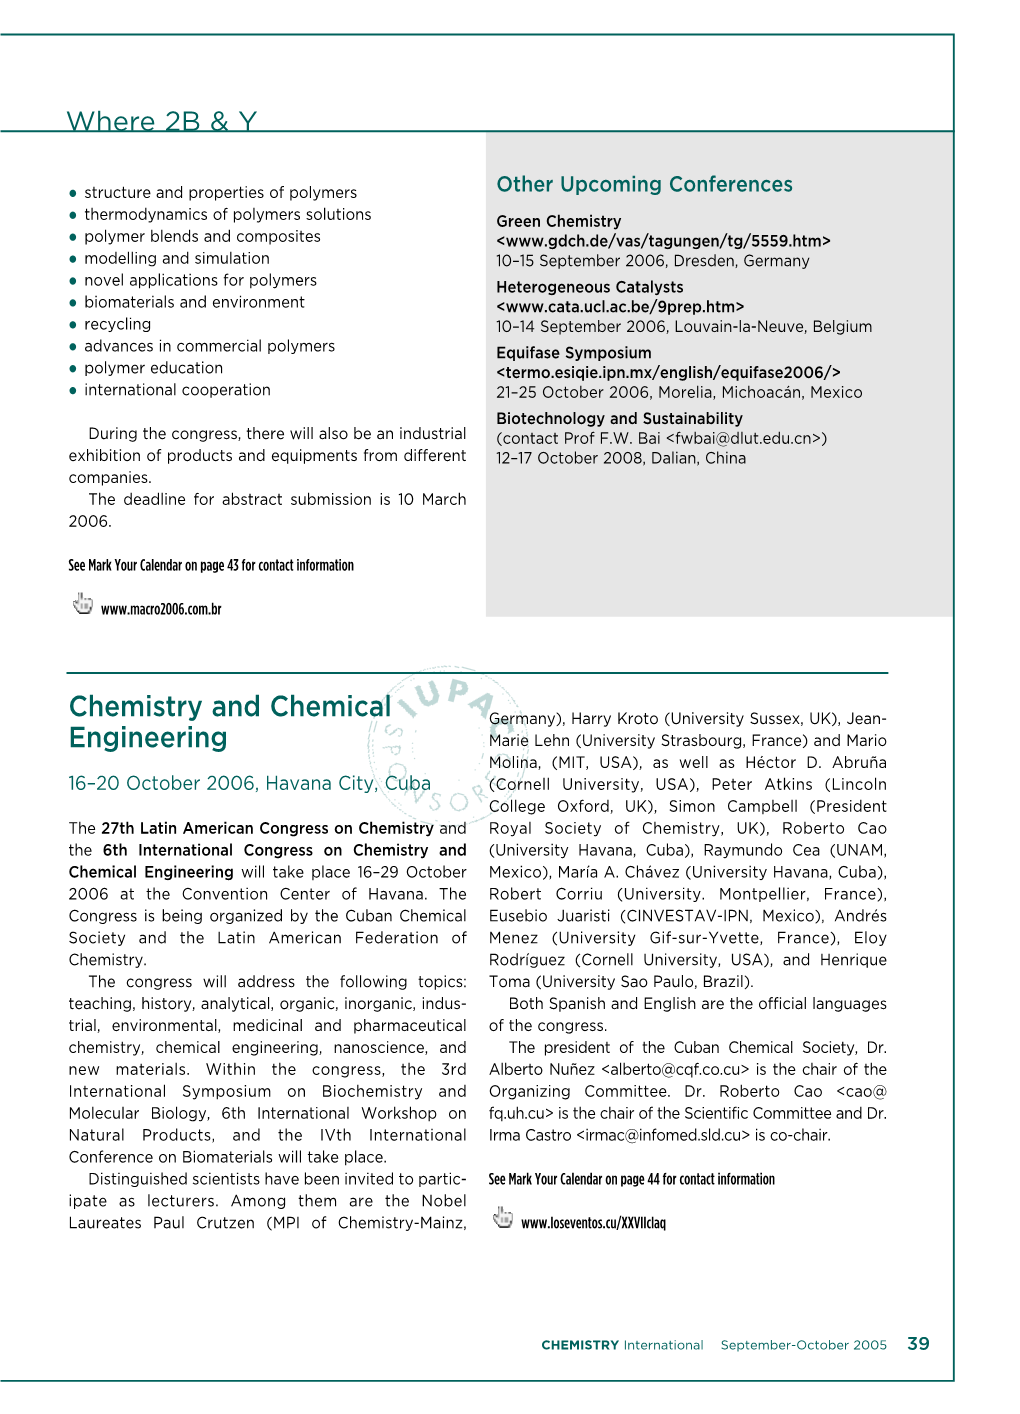 Chemistry and Chemical Engineering